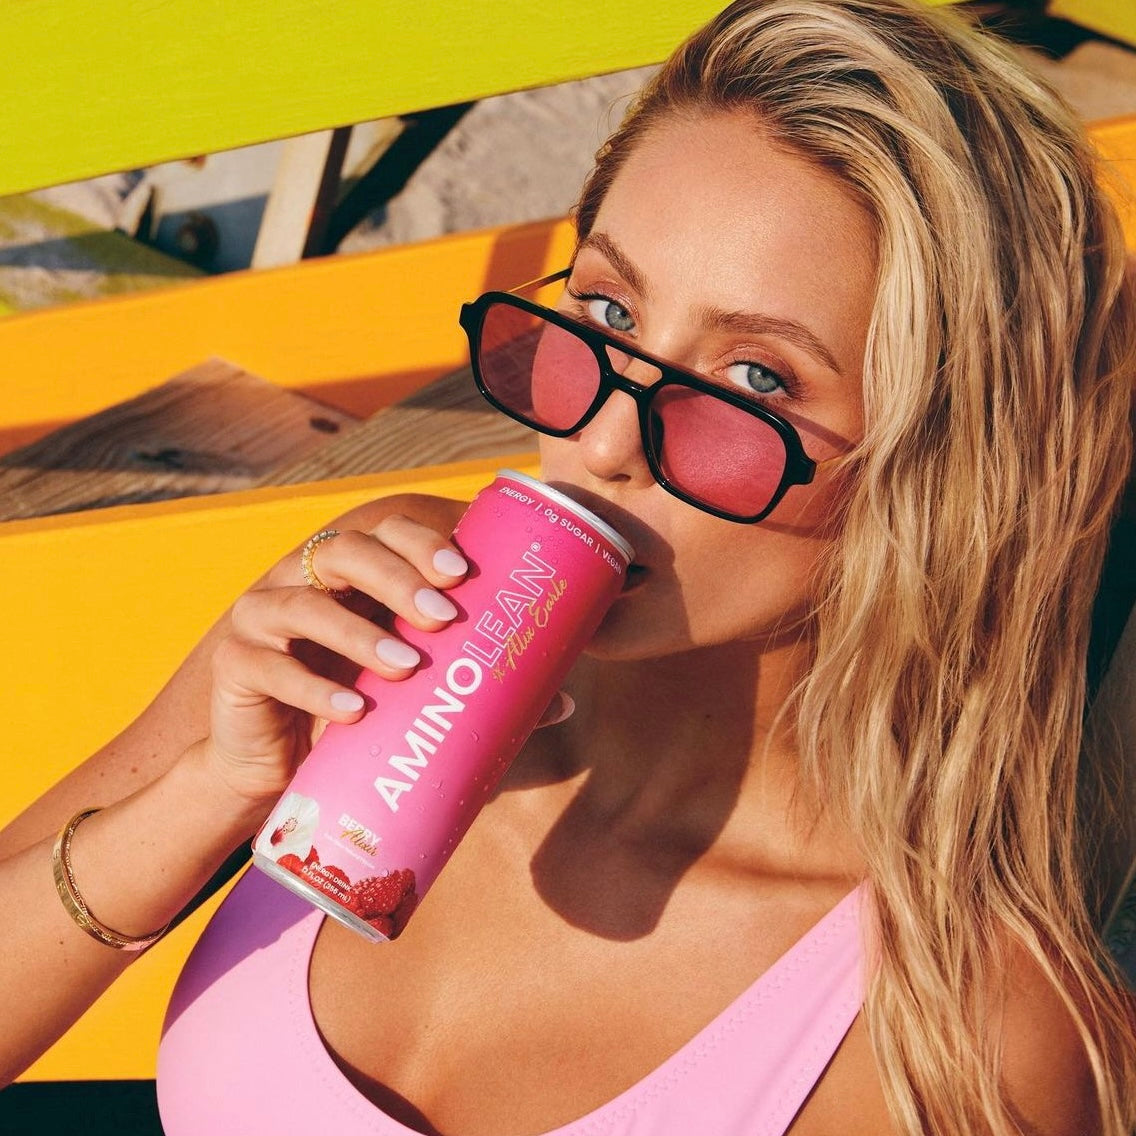 alix earle wearing pink sunglasses drinking a beverage 